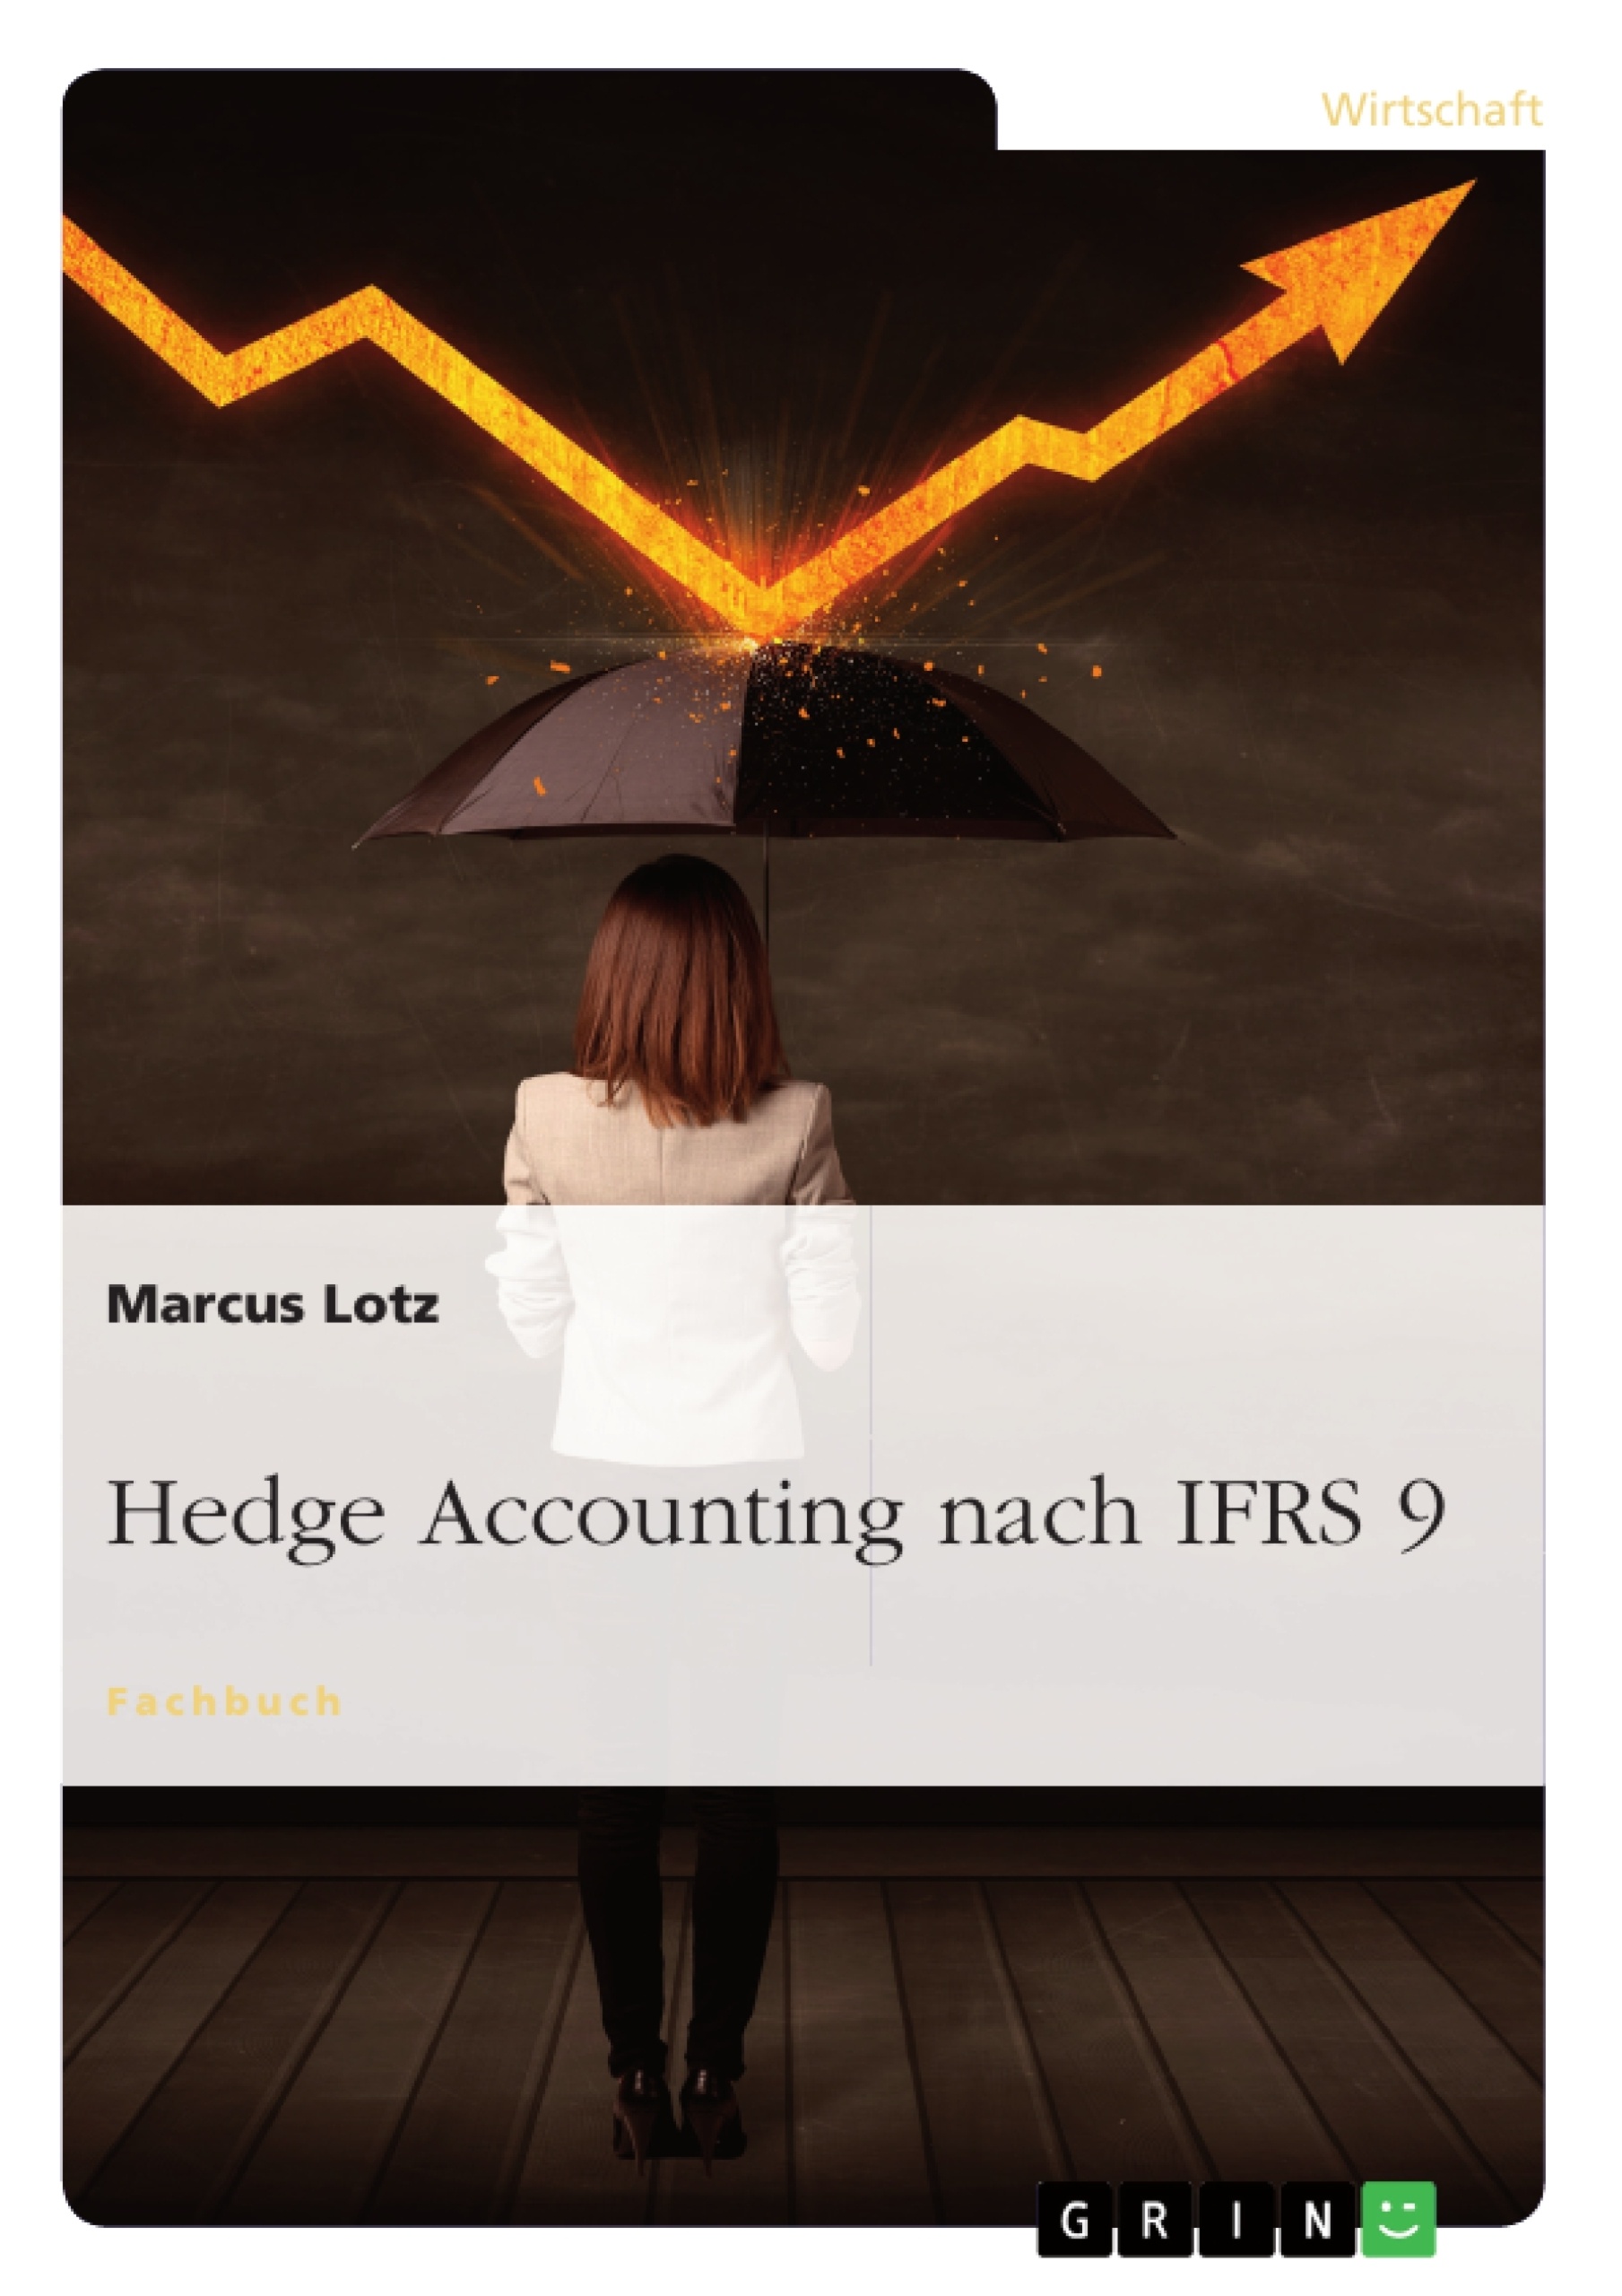 Título: Hedge Accounting nach IFRS 9